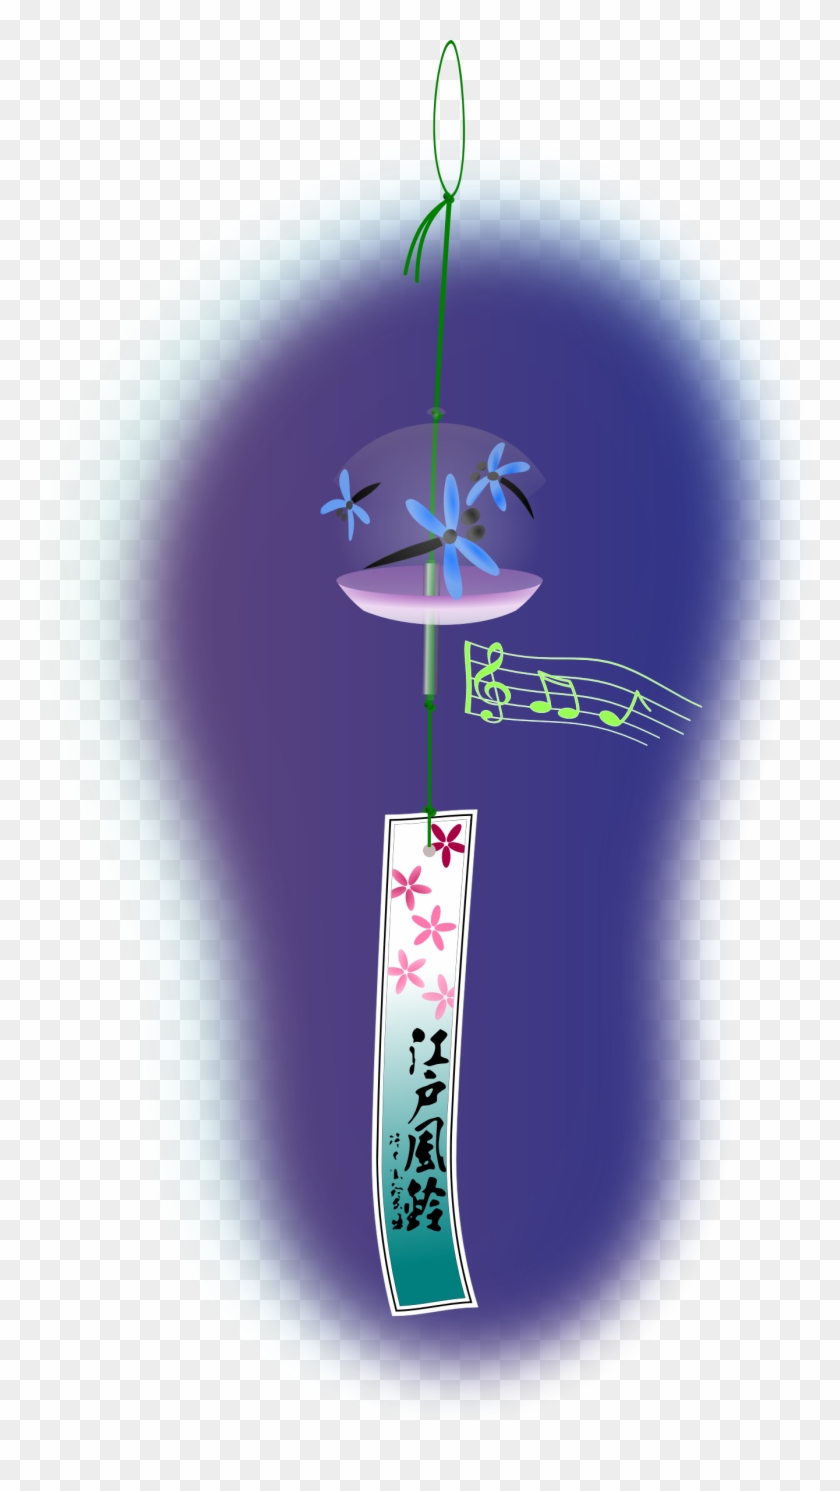 This Free Icons Png Design Of Japanese Wind Chime At Clipart #1295656